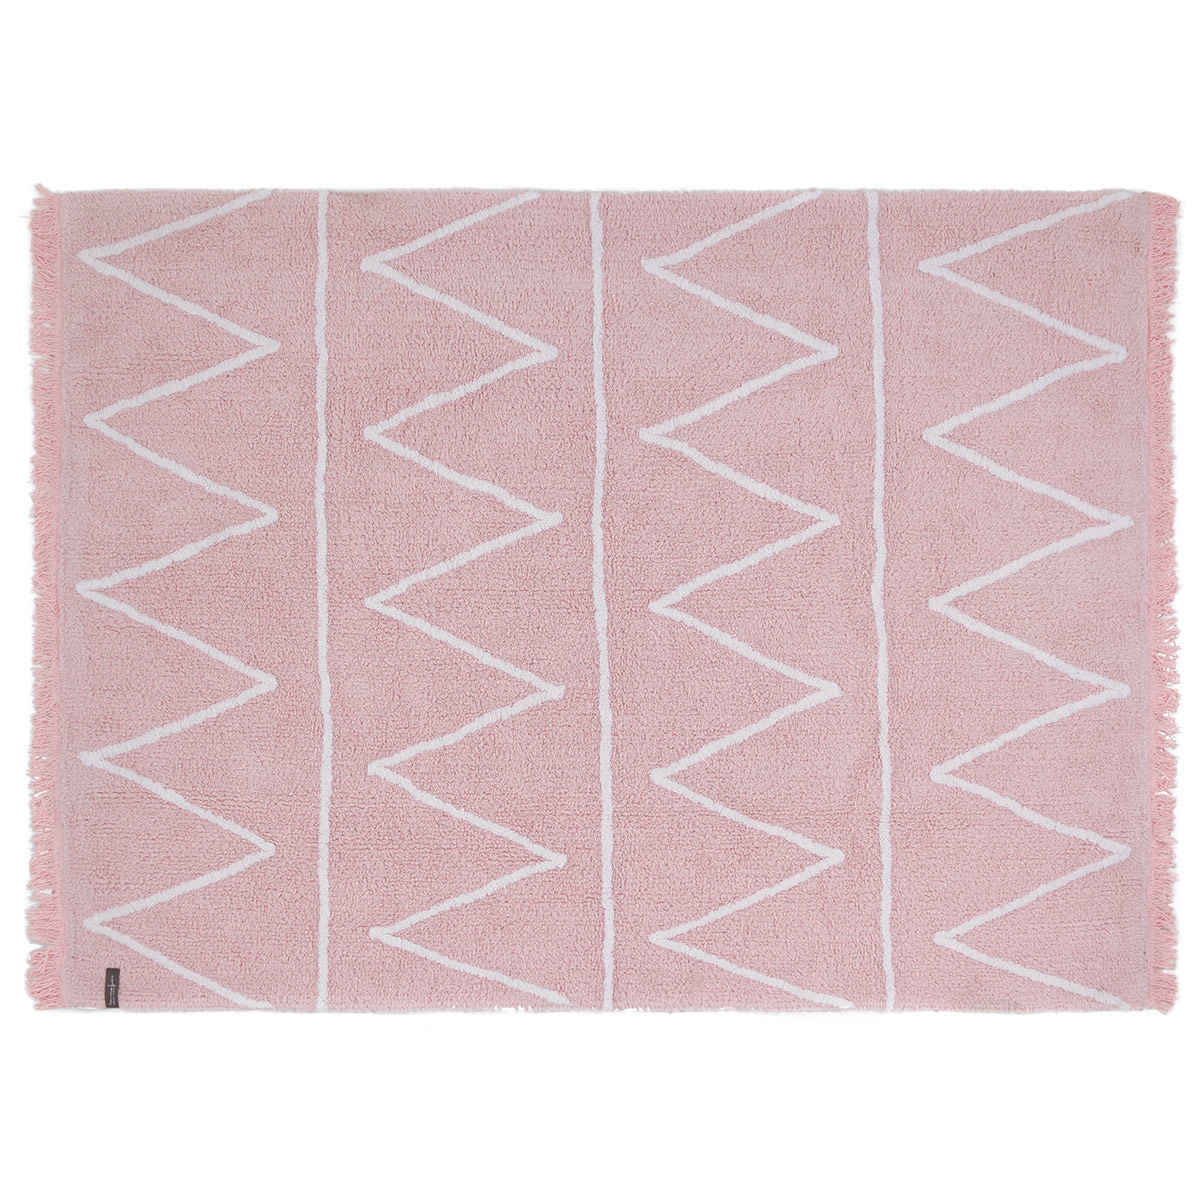 Lorena Canals Χαλί All Season (120x160) Lorena Canals Hippy Soft Pink